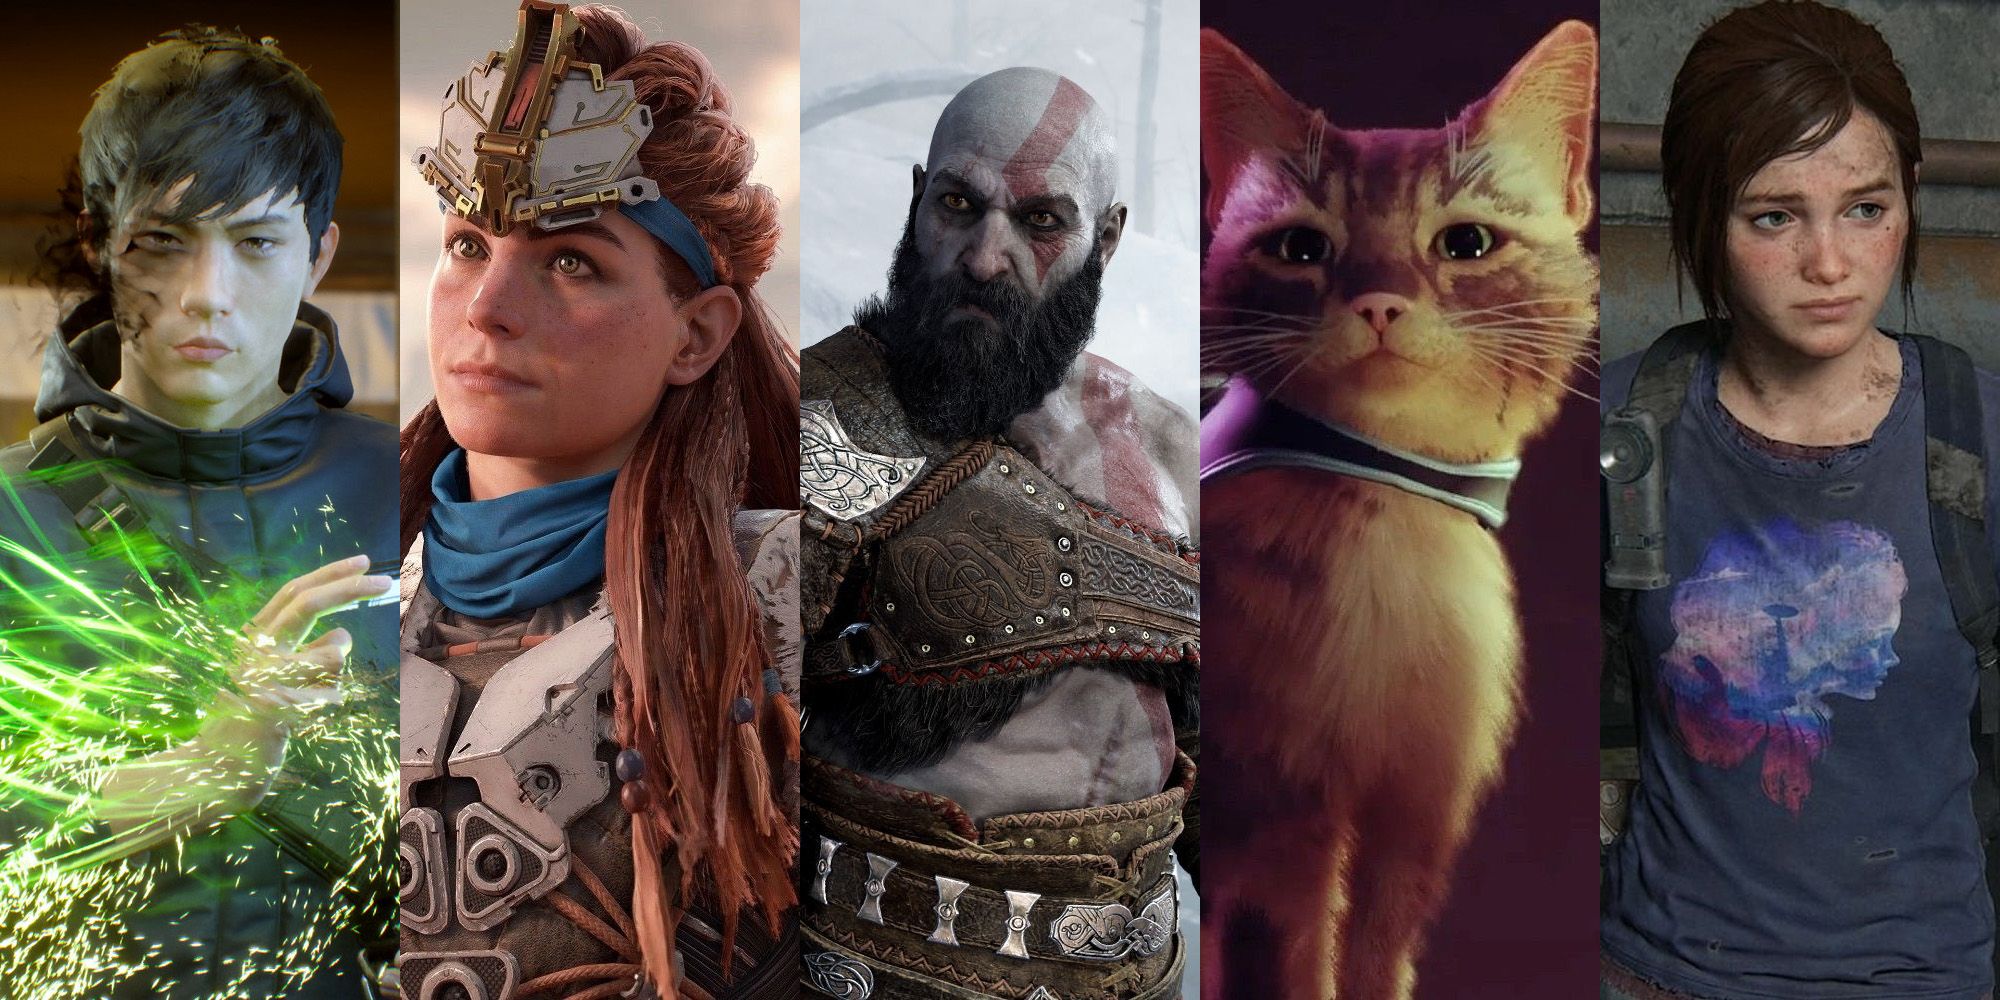 An image split into five vertical segments picturing PlayStation game characters, showing from left to right: Ghostwire: Tokyo's Akito, Horizon Forbidden West's Aloy, God of War Ragnarok's Kratos, the cat from Stray, and The Last of Us Part 1's Ellie.